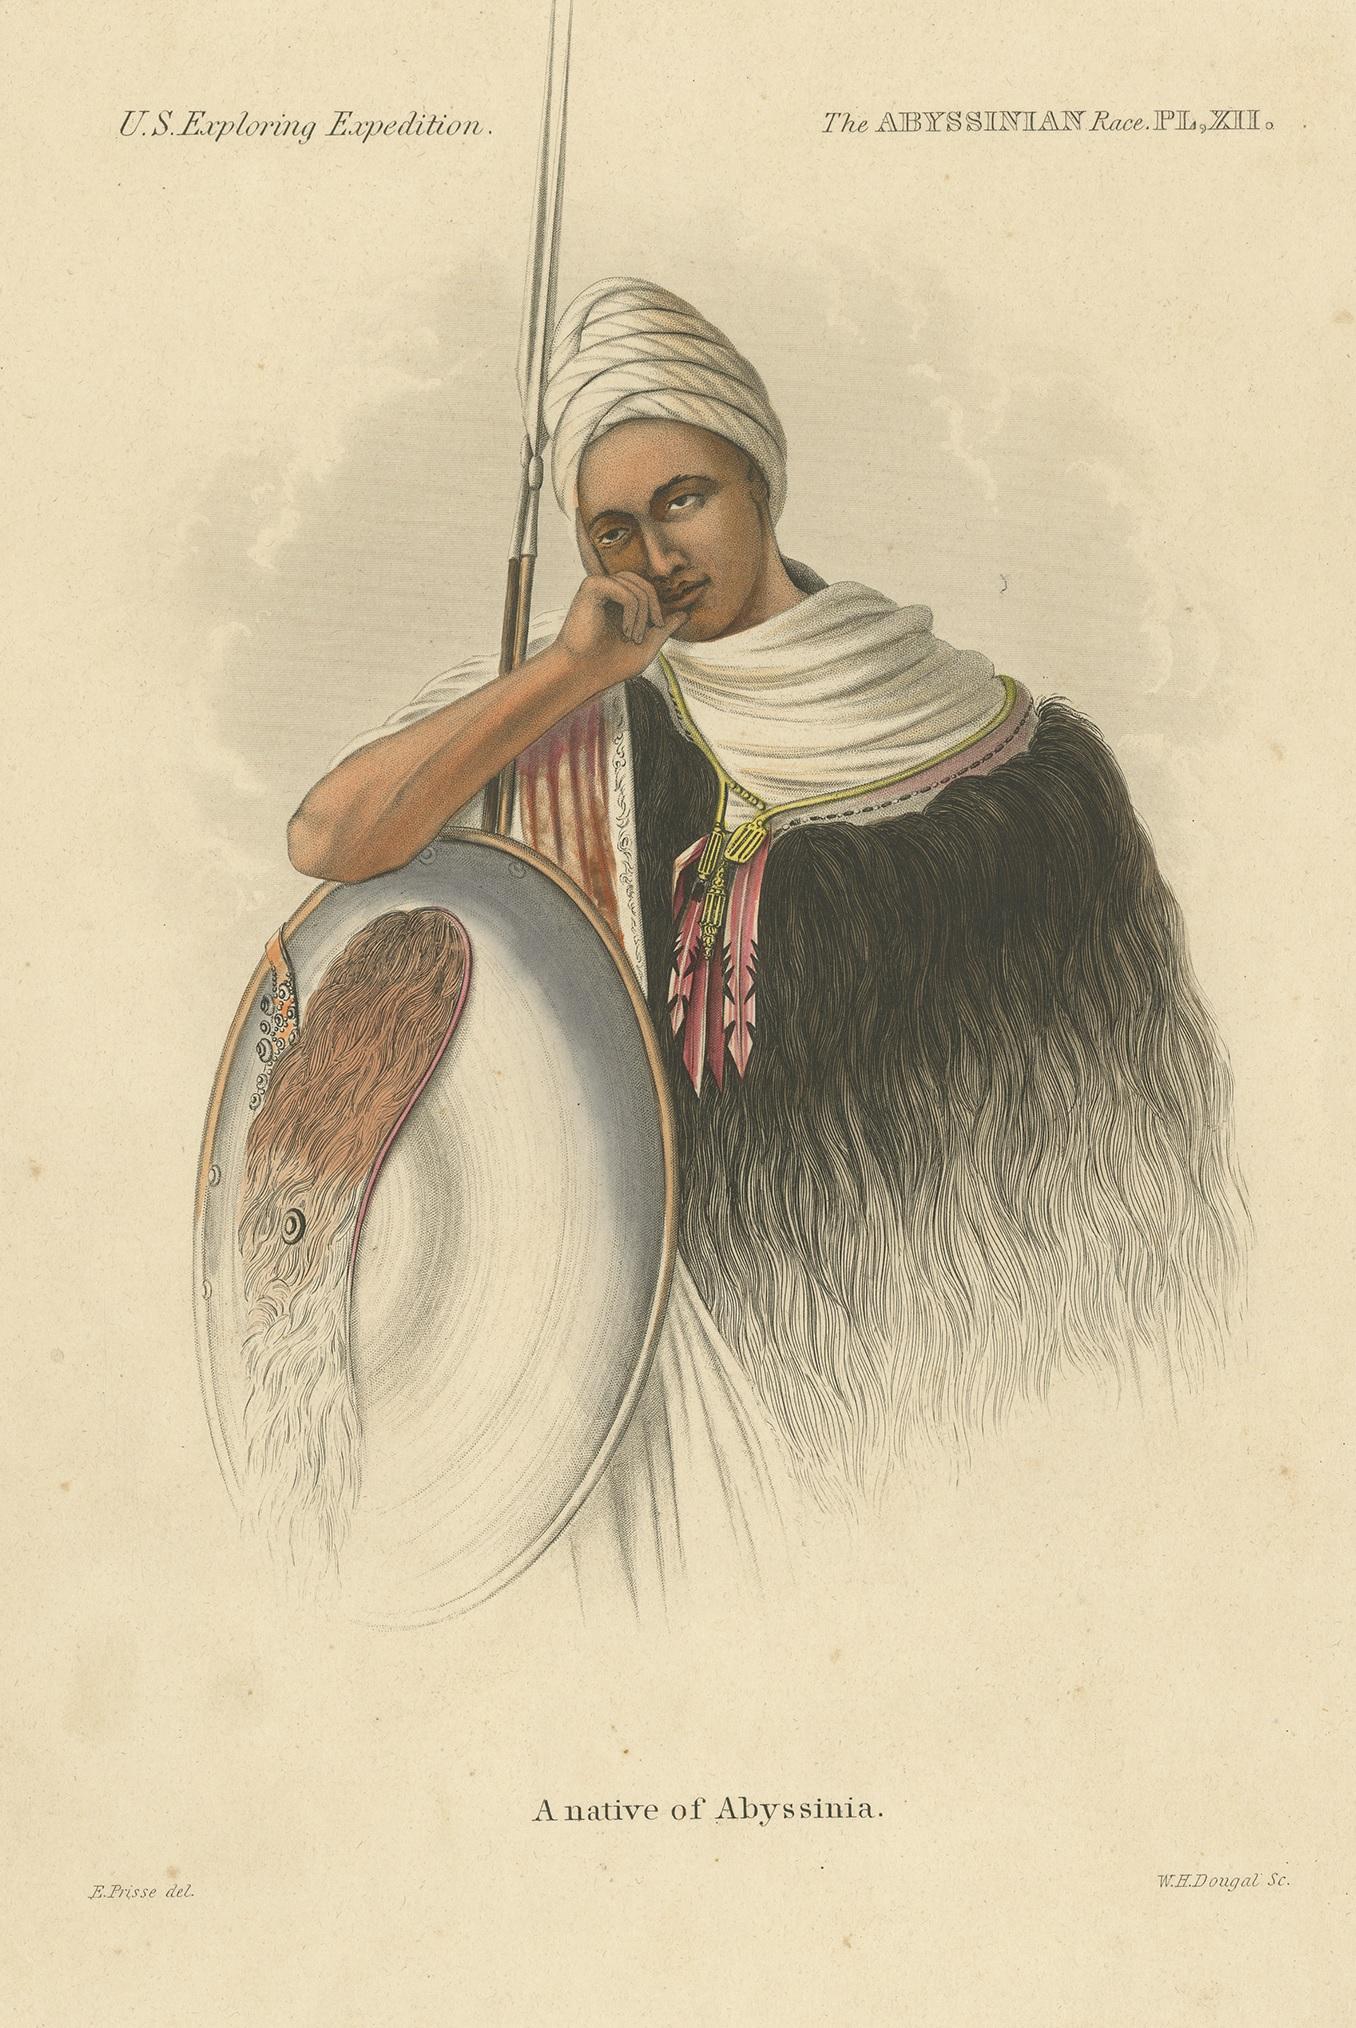 Antique print titled 'A native of Abyssinia'. Lithograph of a native man of Abyssinia with animal-skin cape, turban, spear and shield. This print originates from 'The races of man and their geographical distribution' by Charles Pickering.